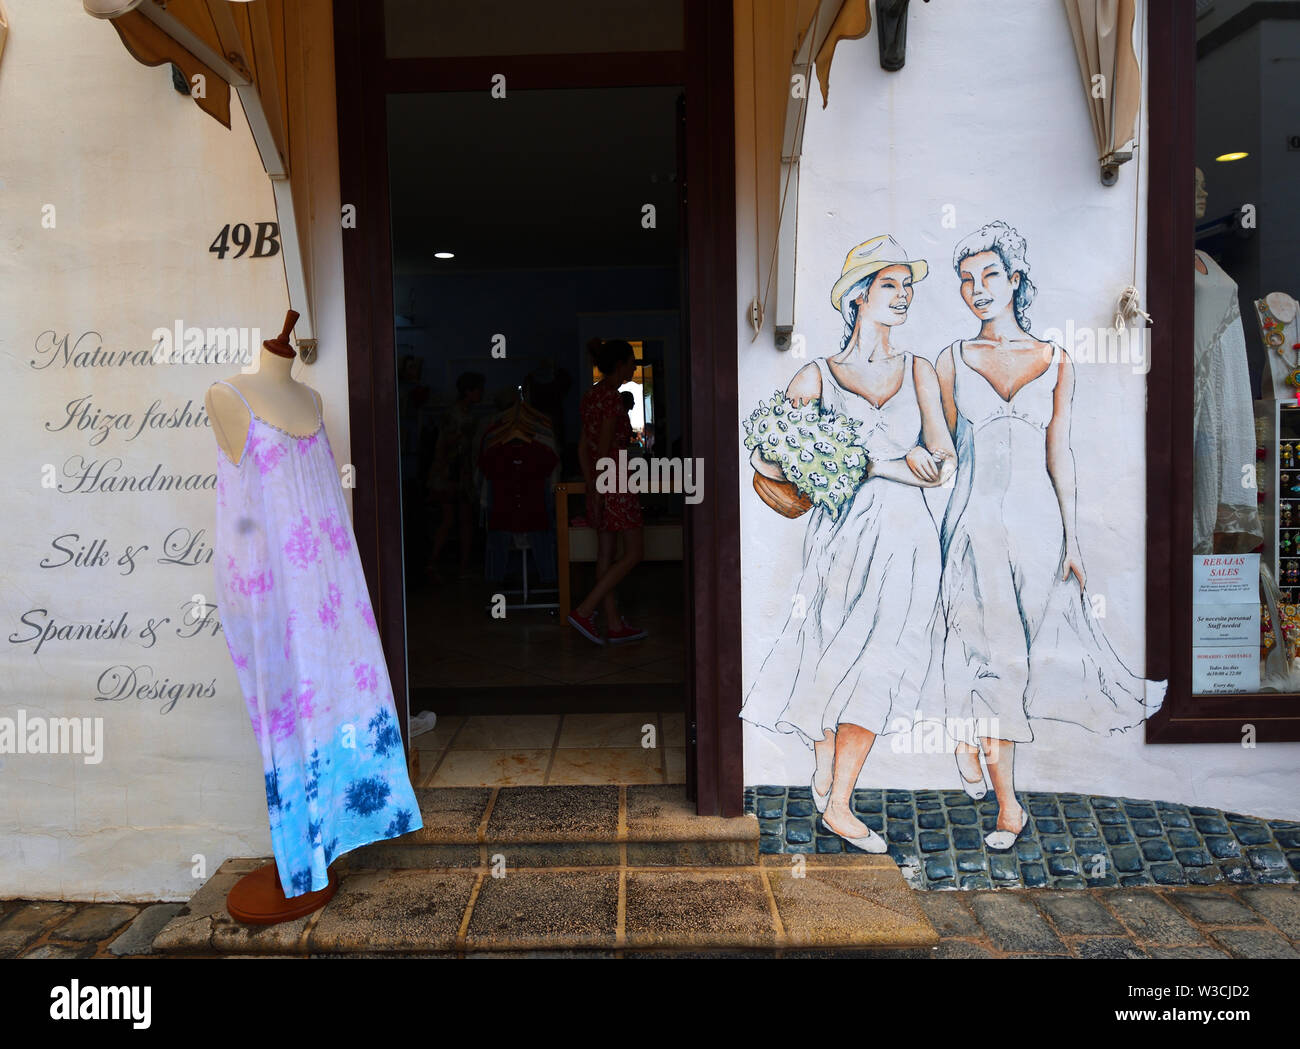 Ladies cloths shop front with painted figures of women on wall. Stock Photo